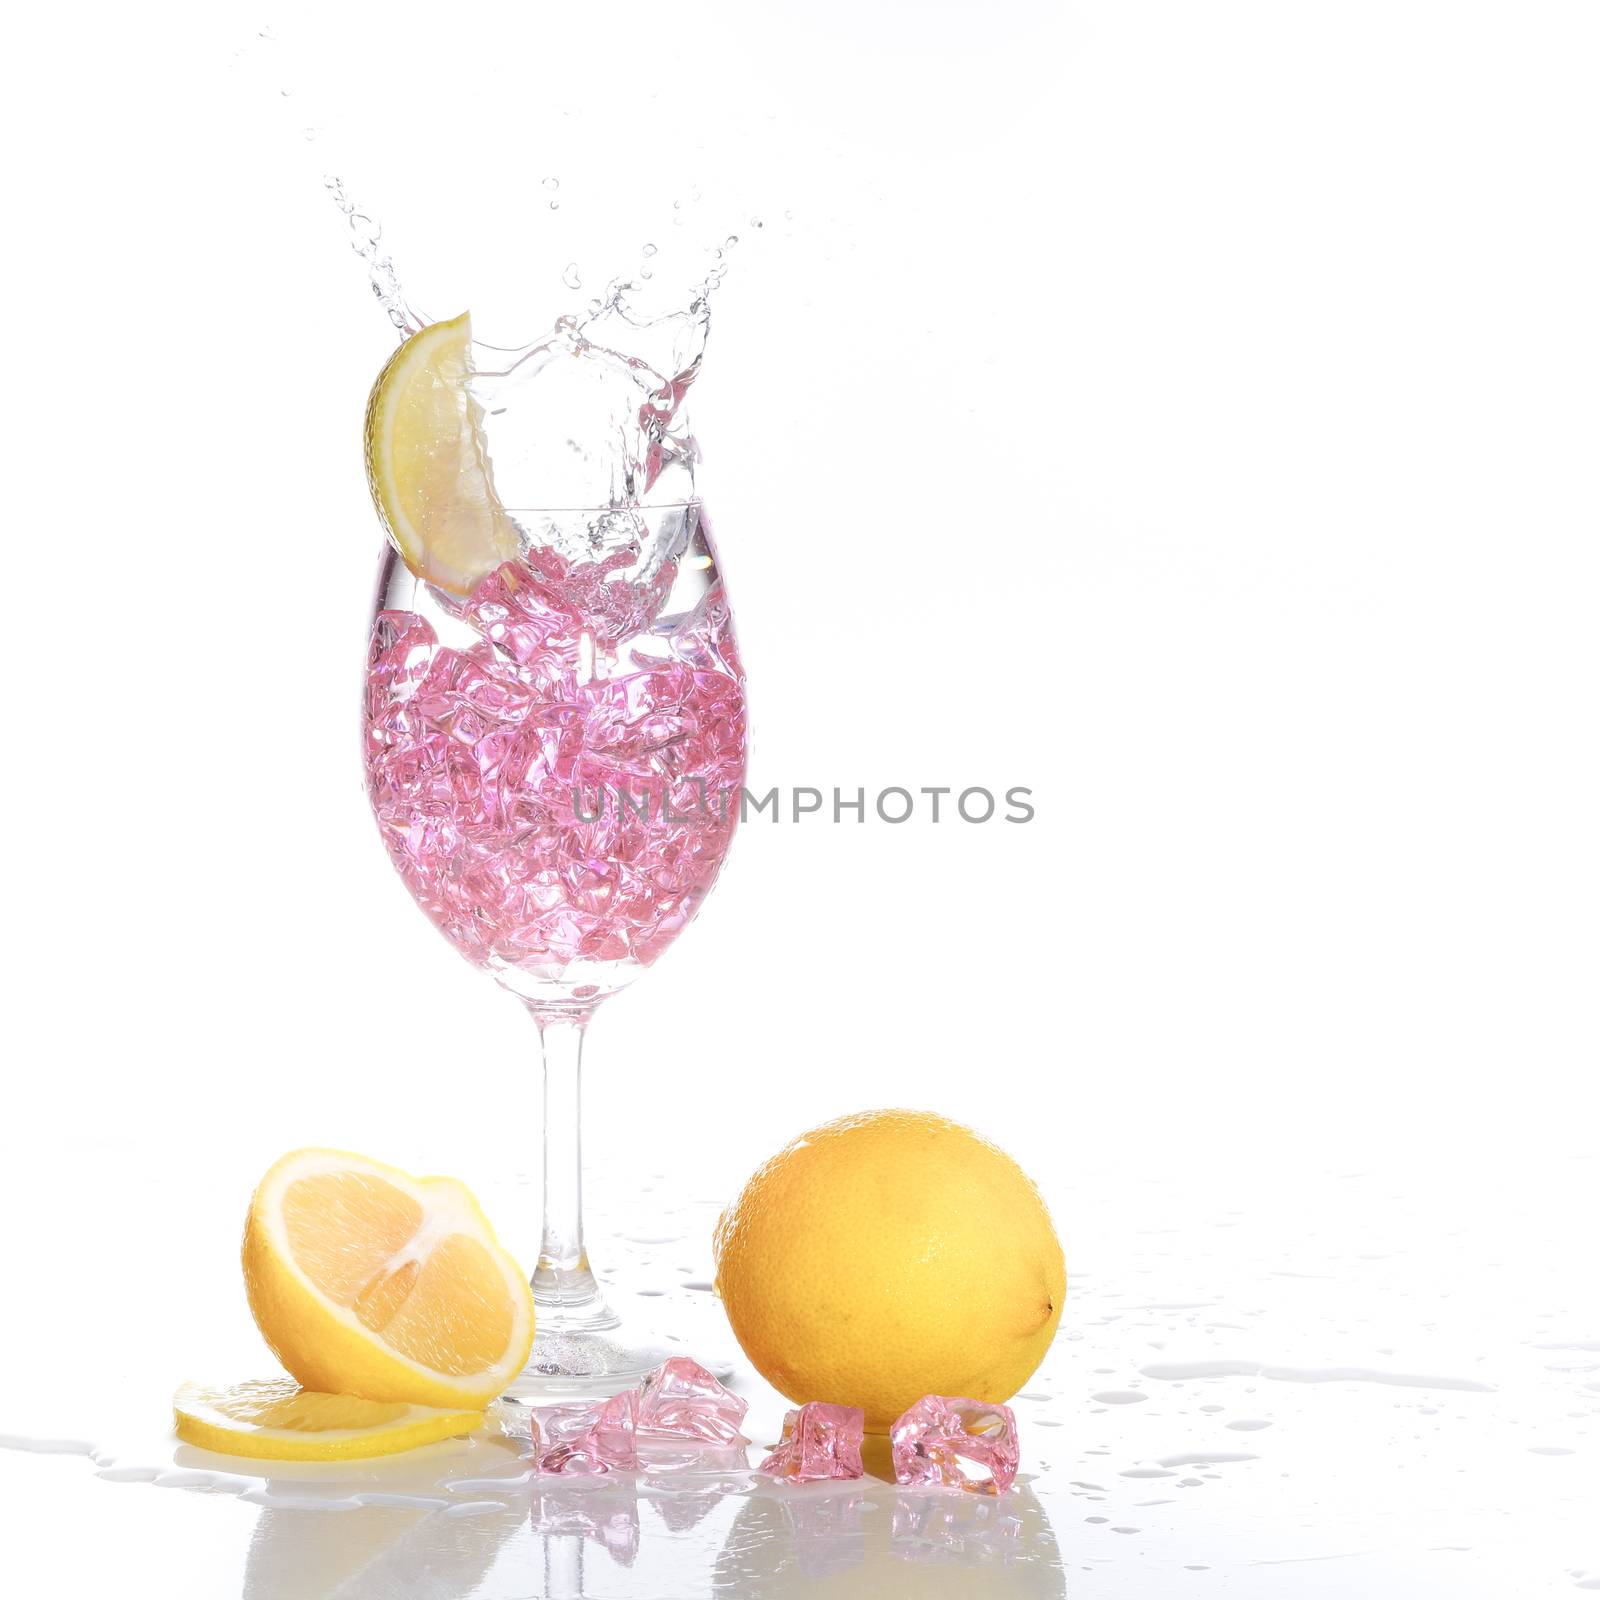 Stemmed champagne glass with lime liquor splashing out, isolated on white background